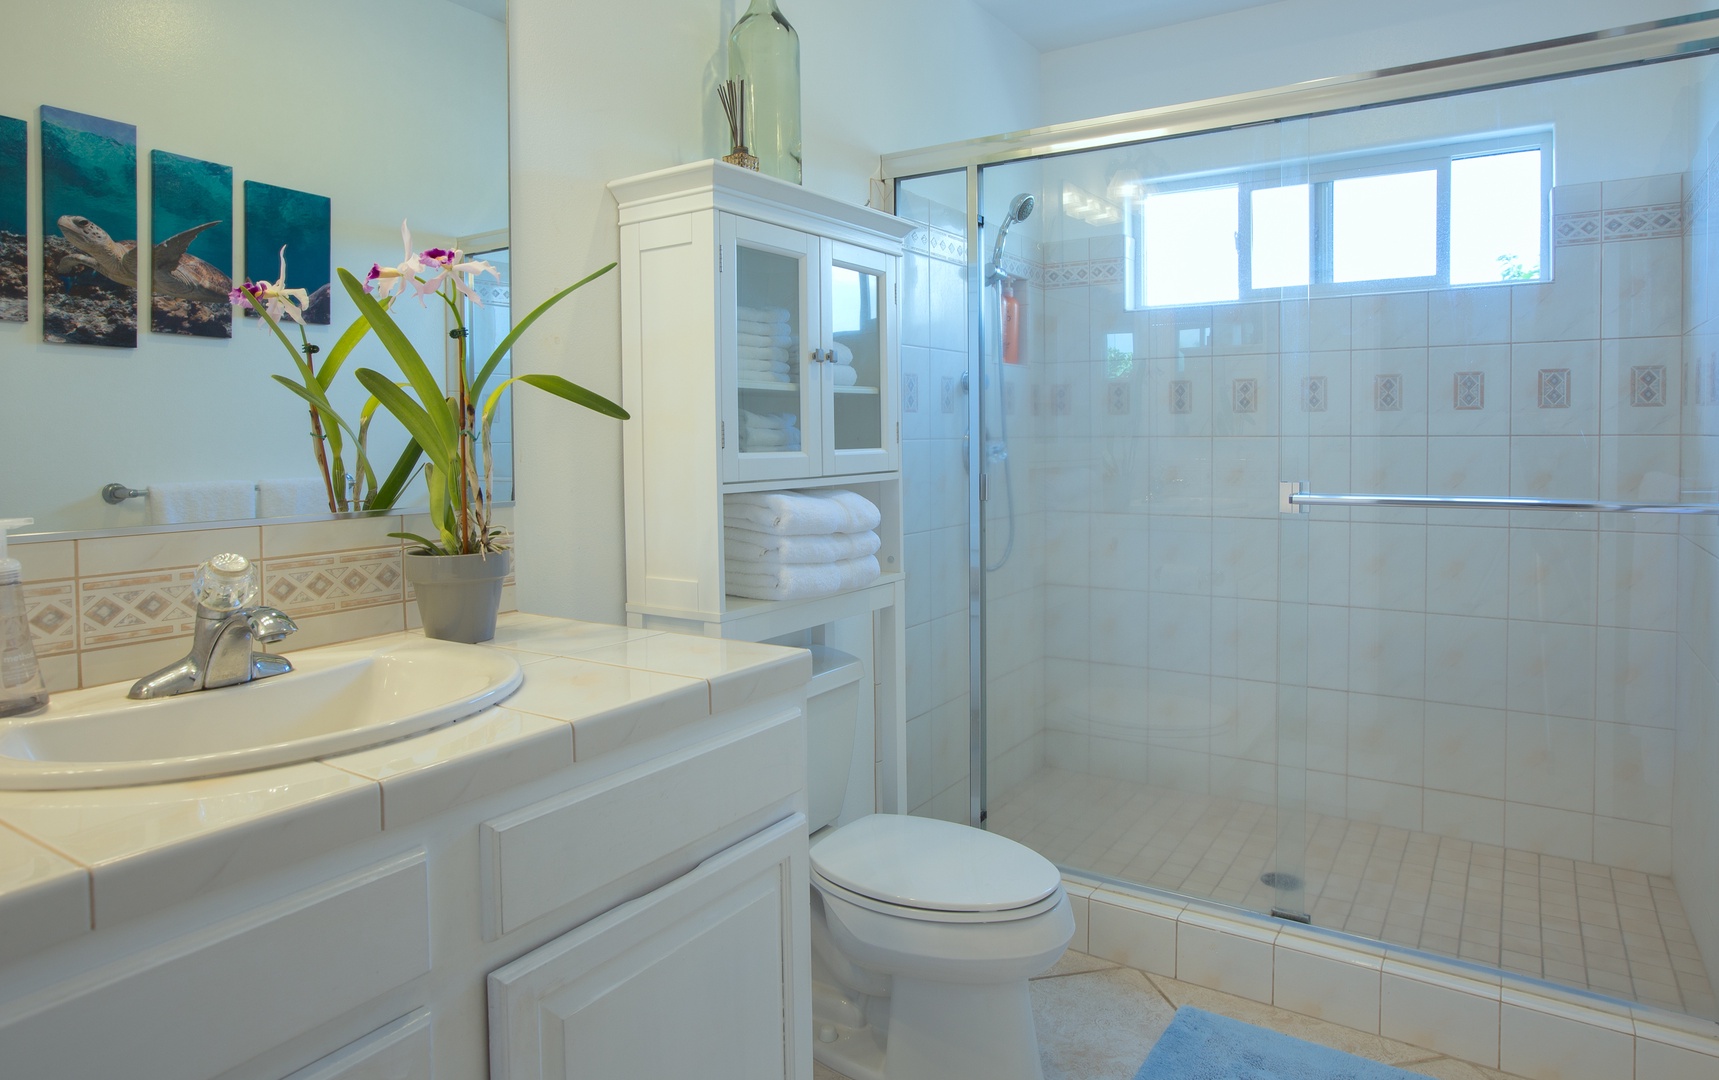 Kailua Kona Vacation Rentals, 7 C's Kona (Big Island) - The bright and spacious second bathroom is right off the second and third bedrooms in the hallway.